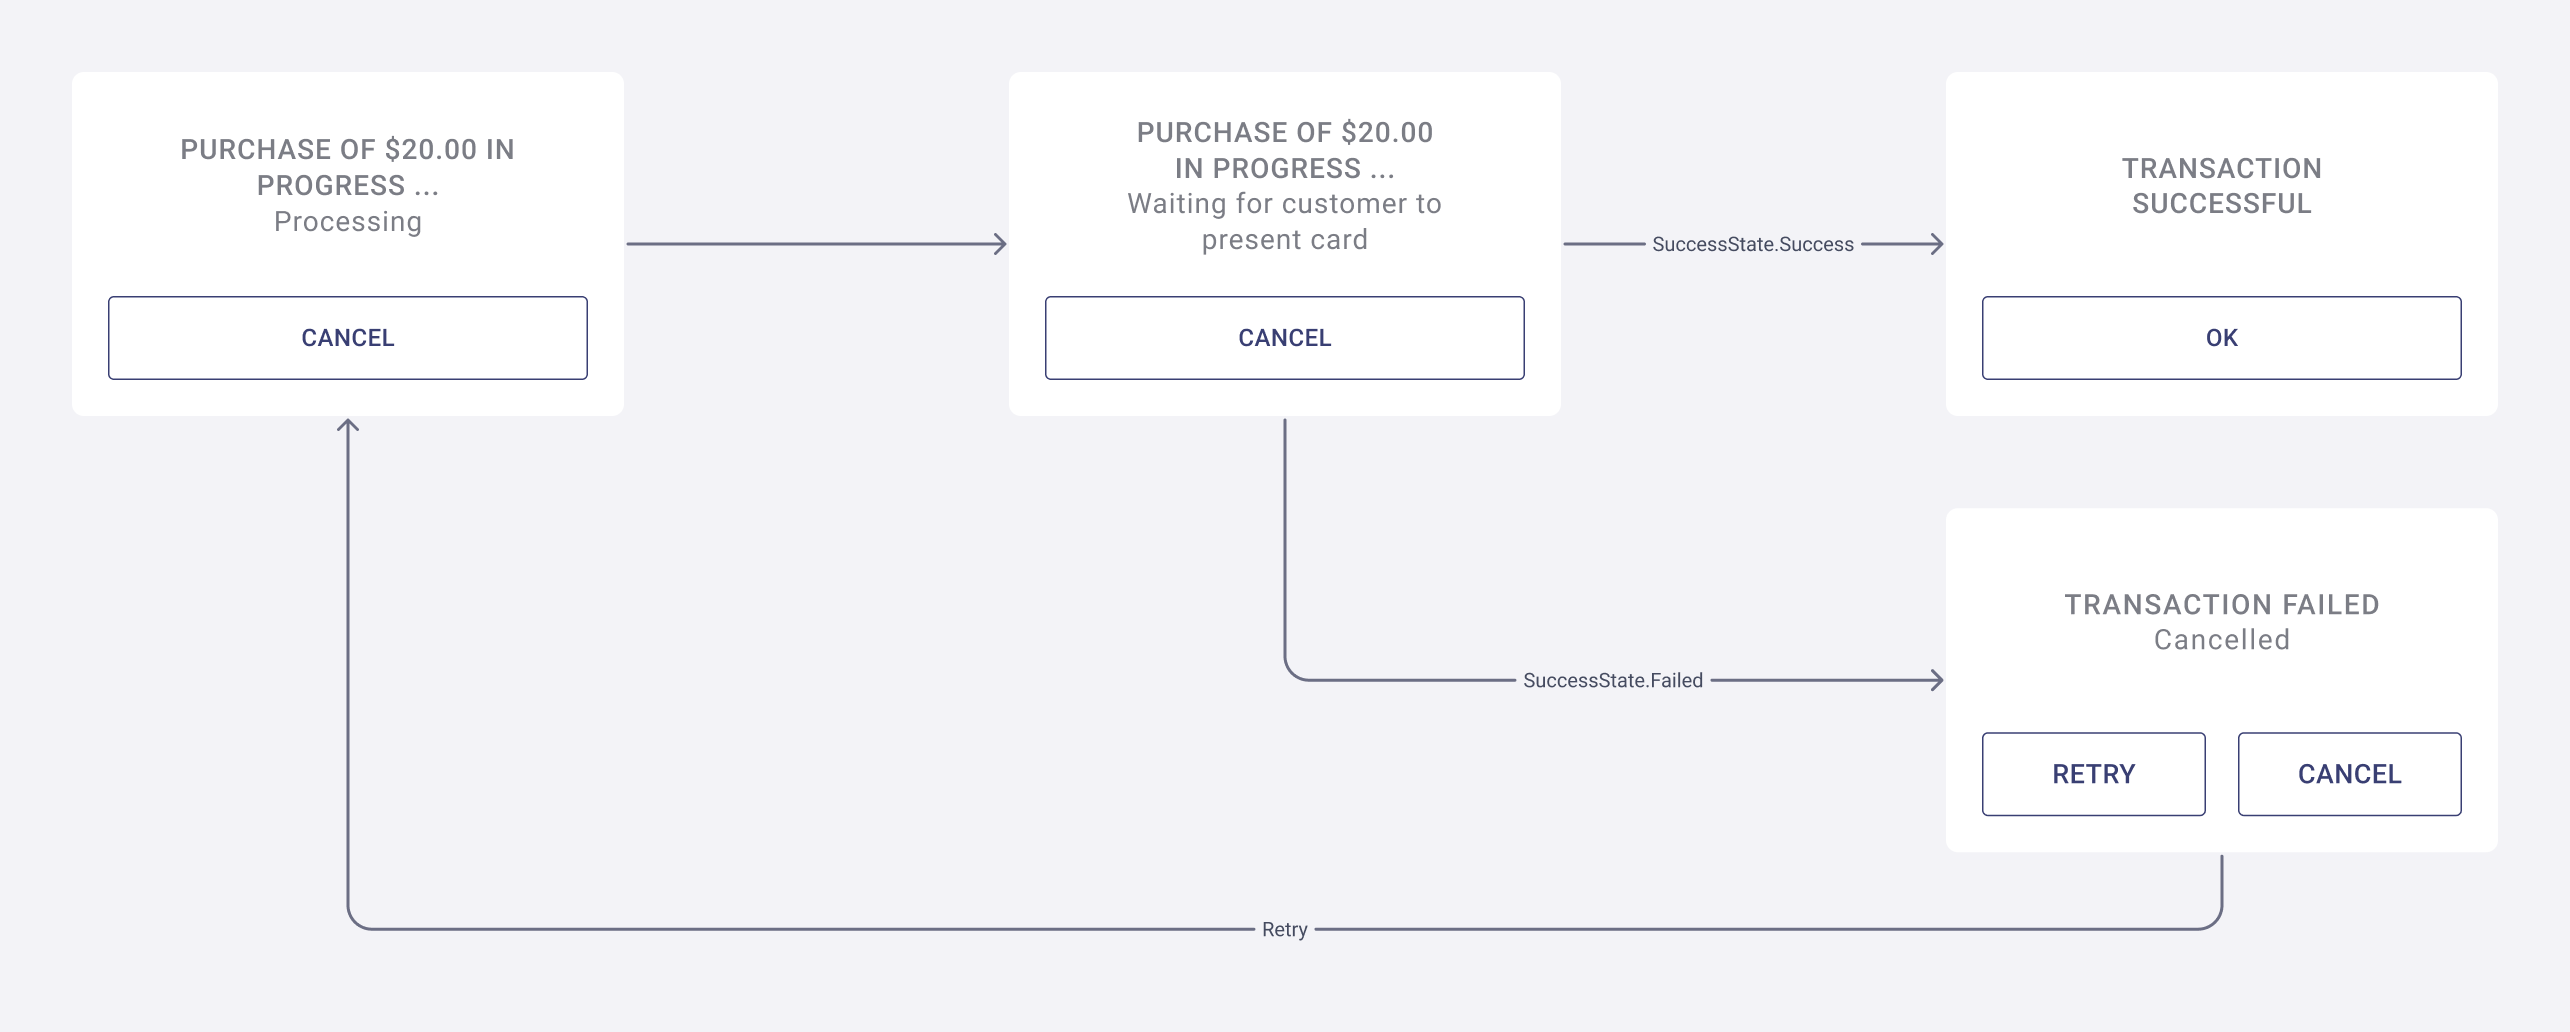 A flow diagram of the UI screens needed for making a transaction.